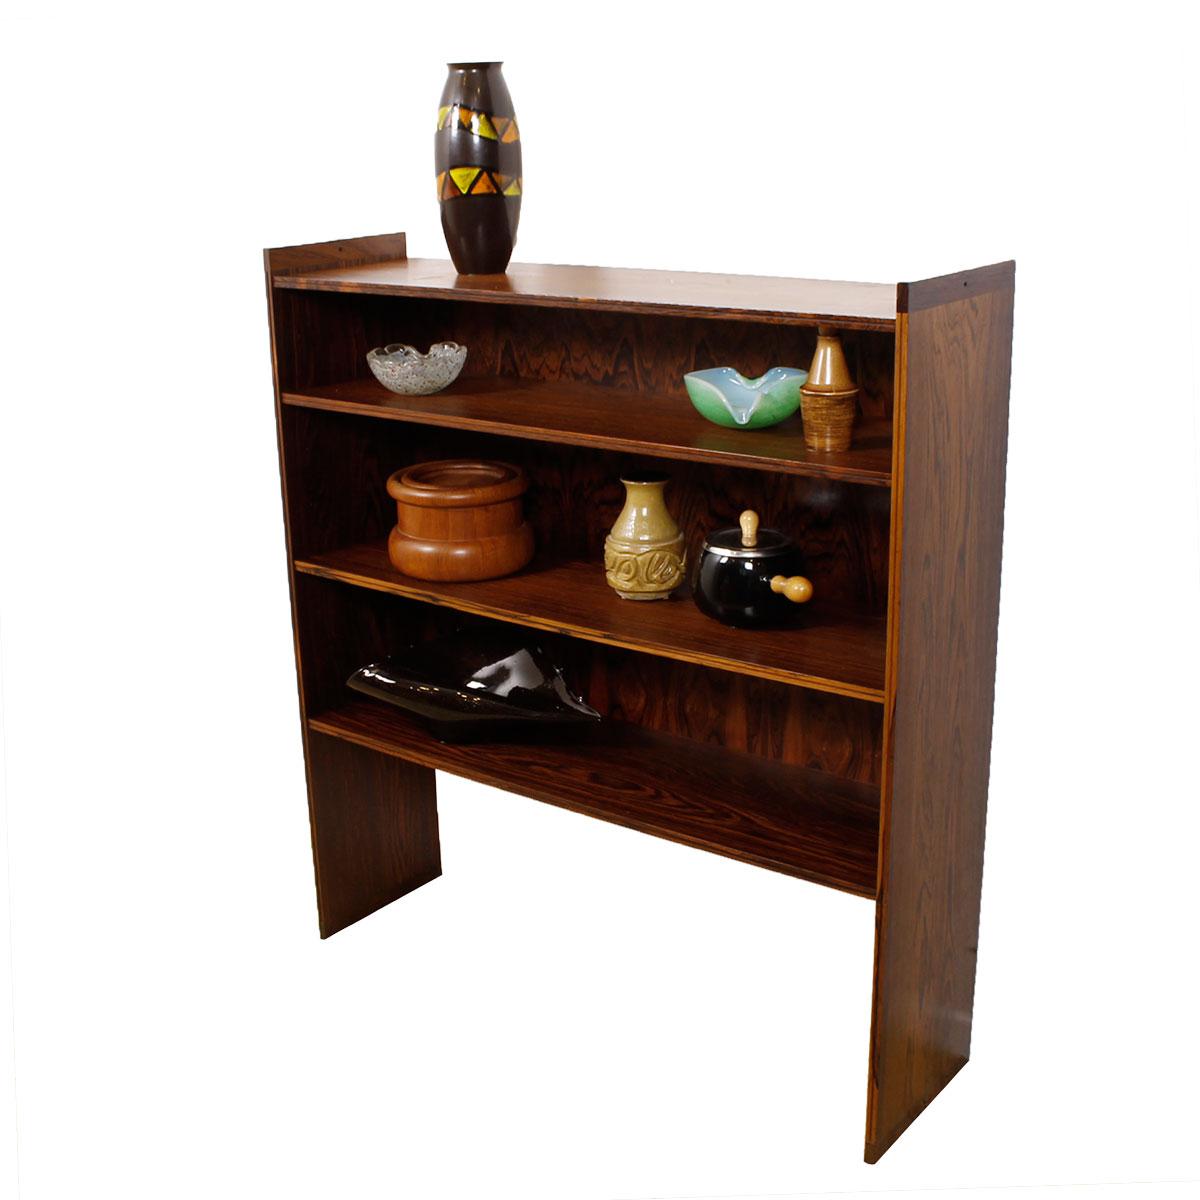 Royal Danish Embassy Slender-Edged Bookcase by Grete Jalk in Brazilian Rosewood For Sale 3